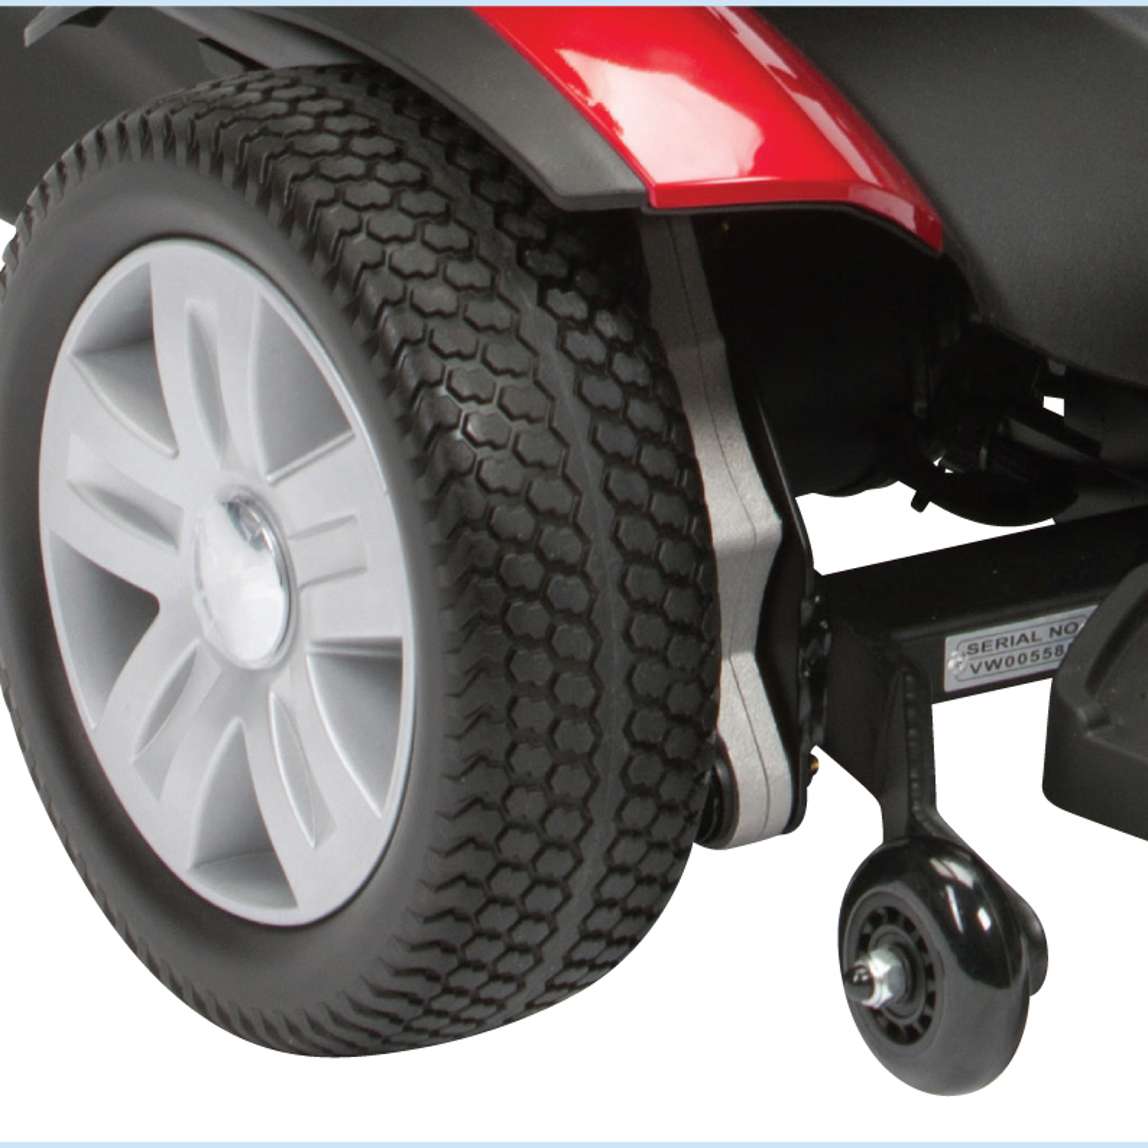 Titan LTE Powerchair - Compact and Transportable Indoor Mobility Solution